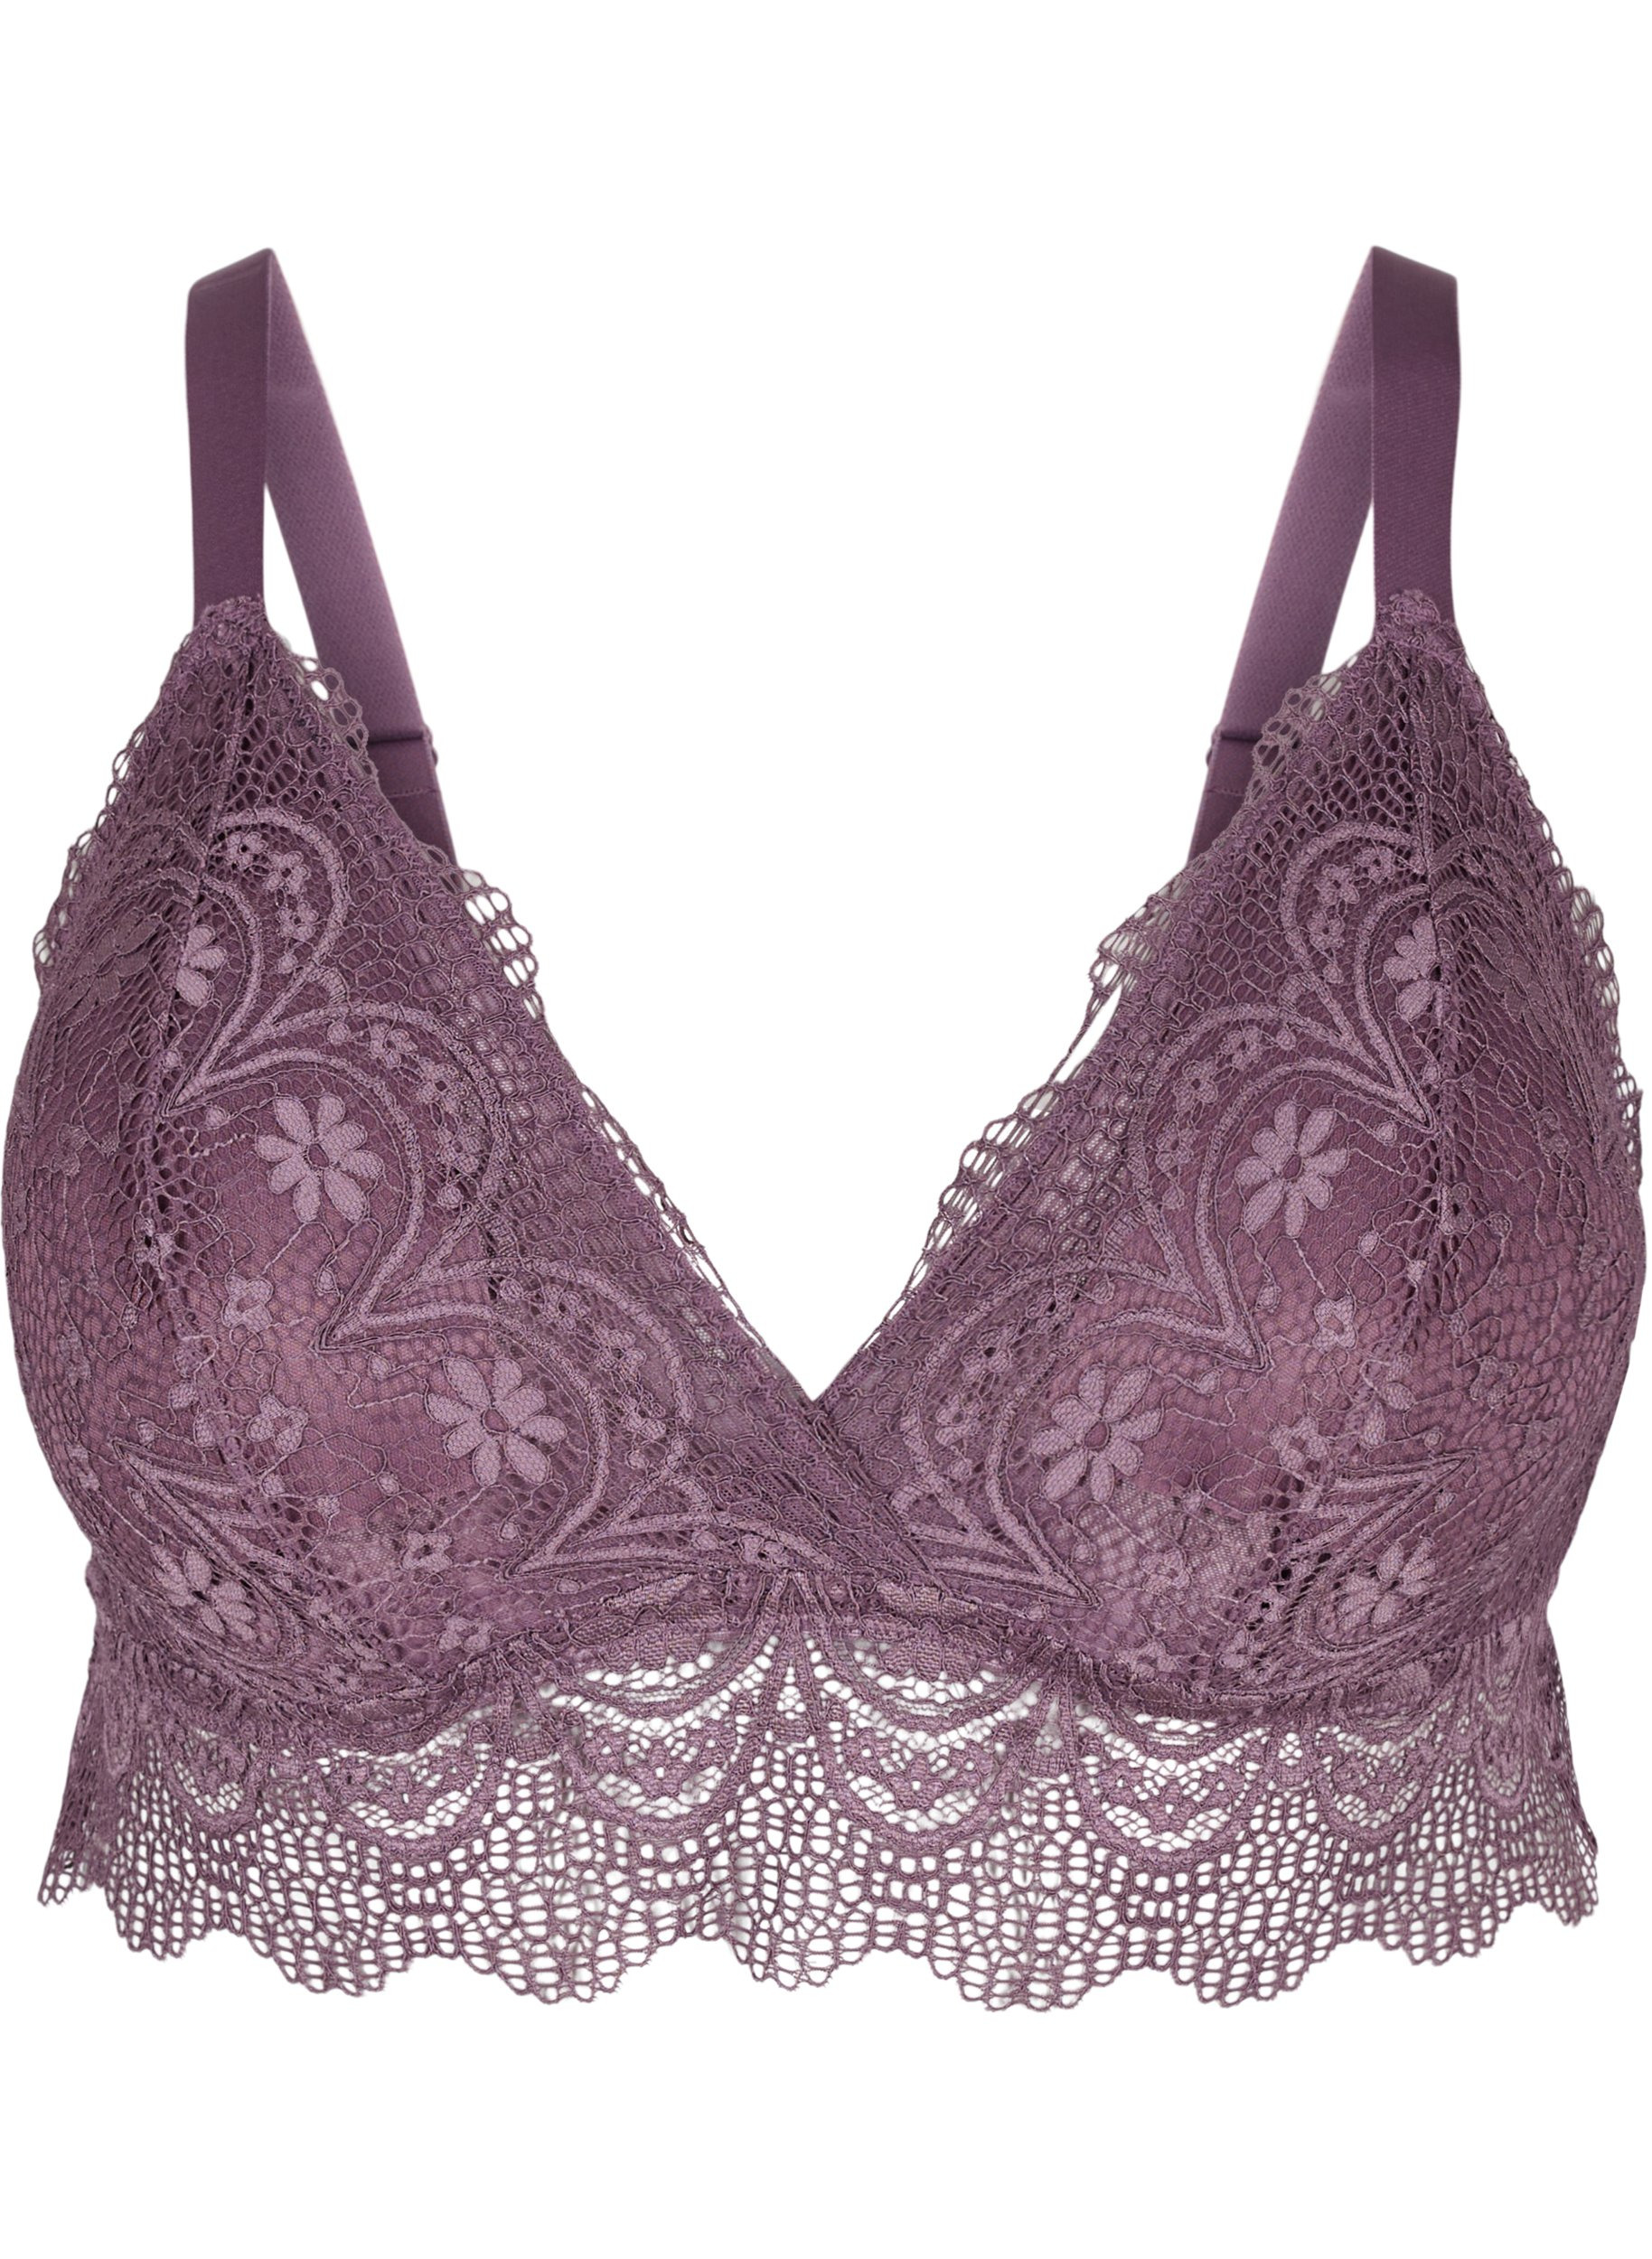 Lace bra with removable inserts, Black Plum